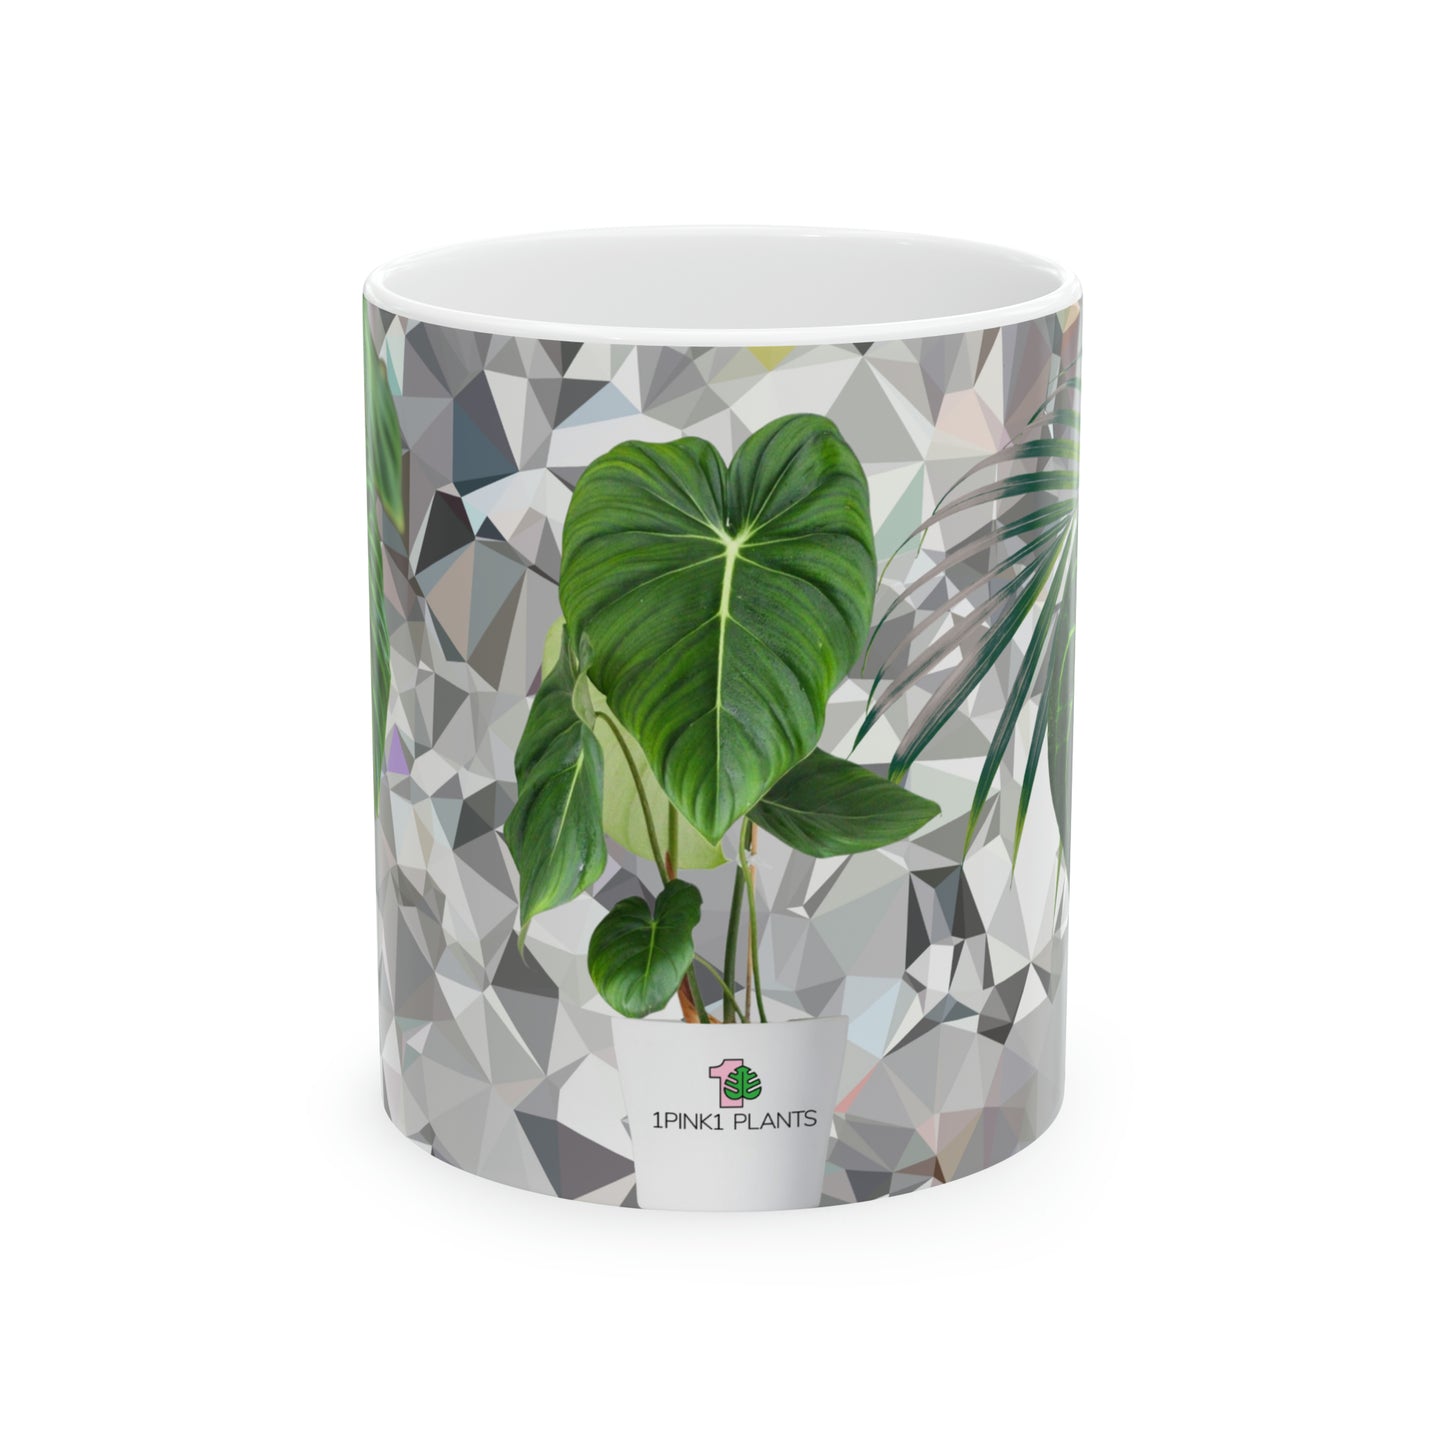 White Philodendron Ceramic Mug, 11oz Coffee Mug With Philodendron Pictures